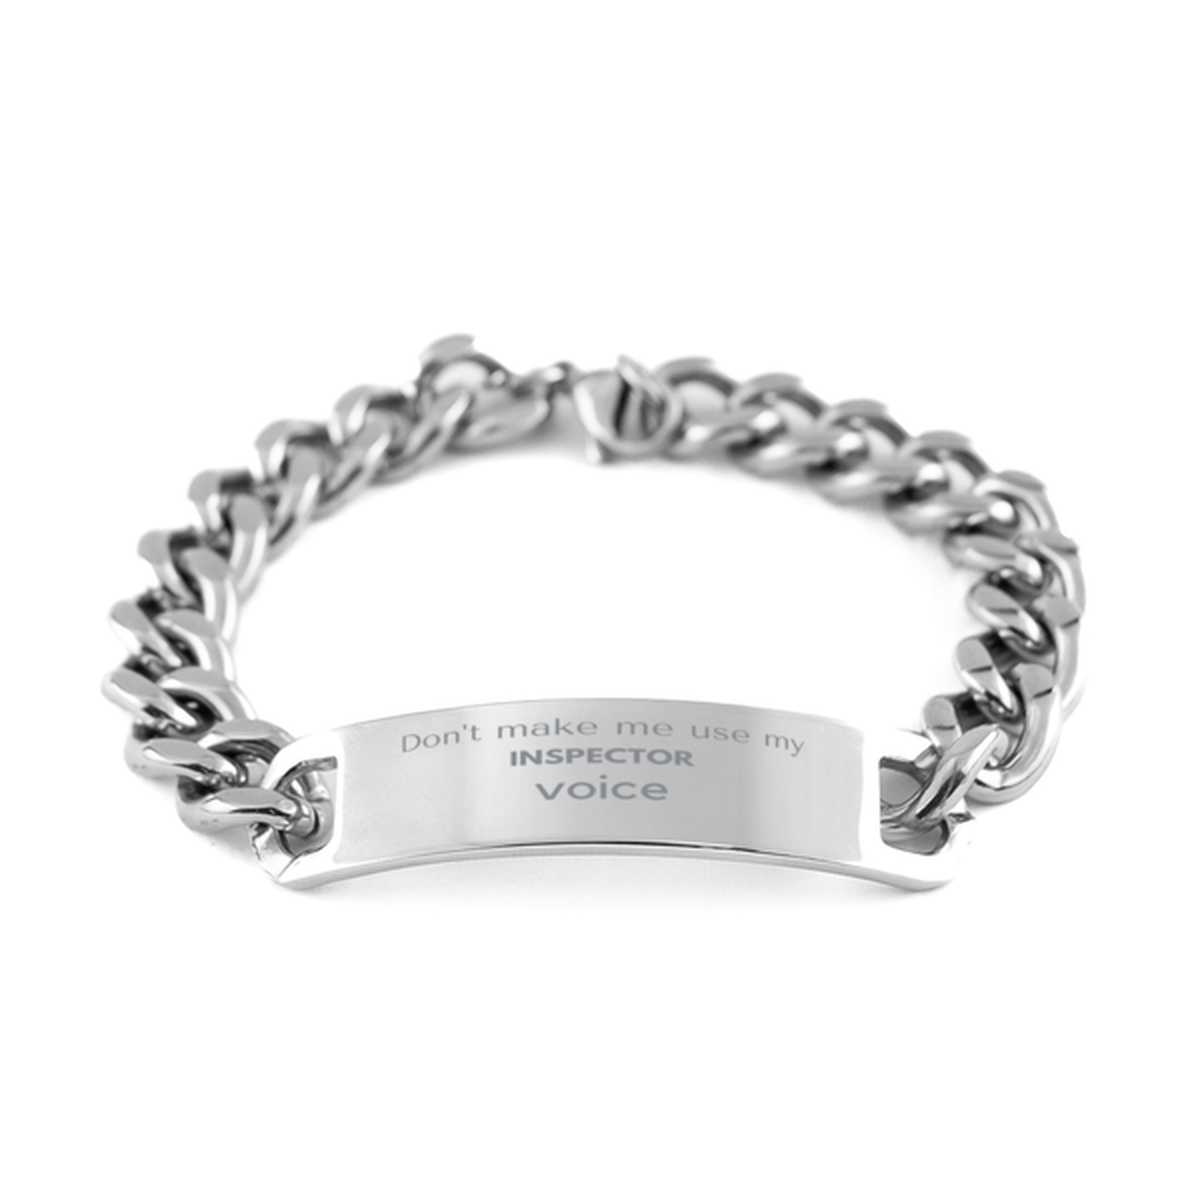 Don't make me use my Inspector voice, Sarcasm Inspector Gifts, Christmas Inspector Cuban Chain Stainless Steel Bracelet Birthday Unique Gifts For Inspector Coworkers, Men, Women, Colleague, Friends